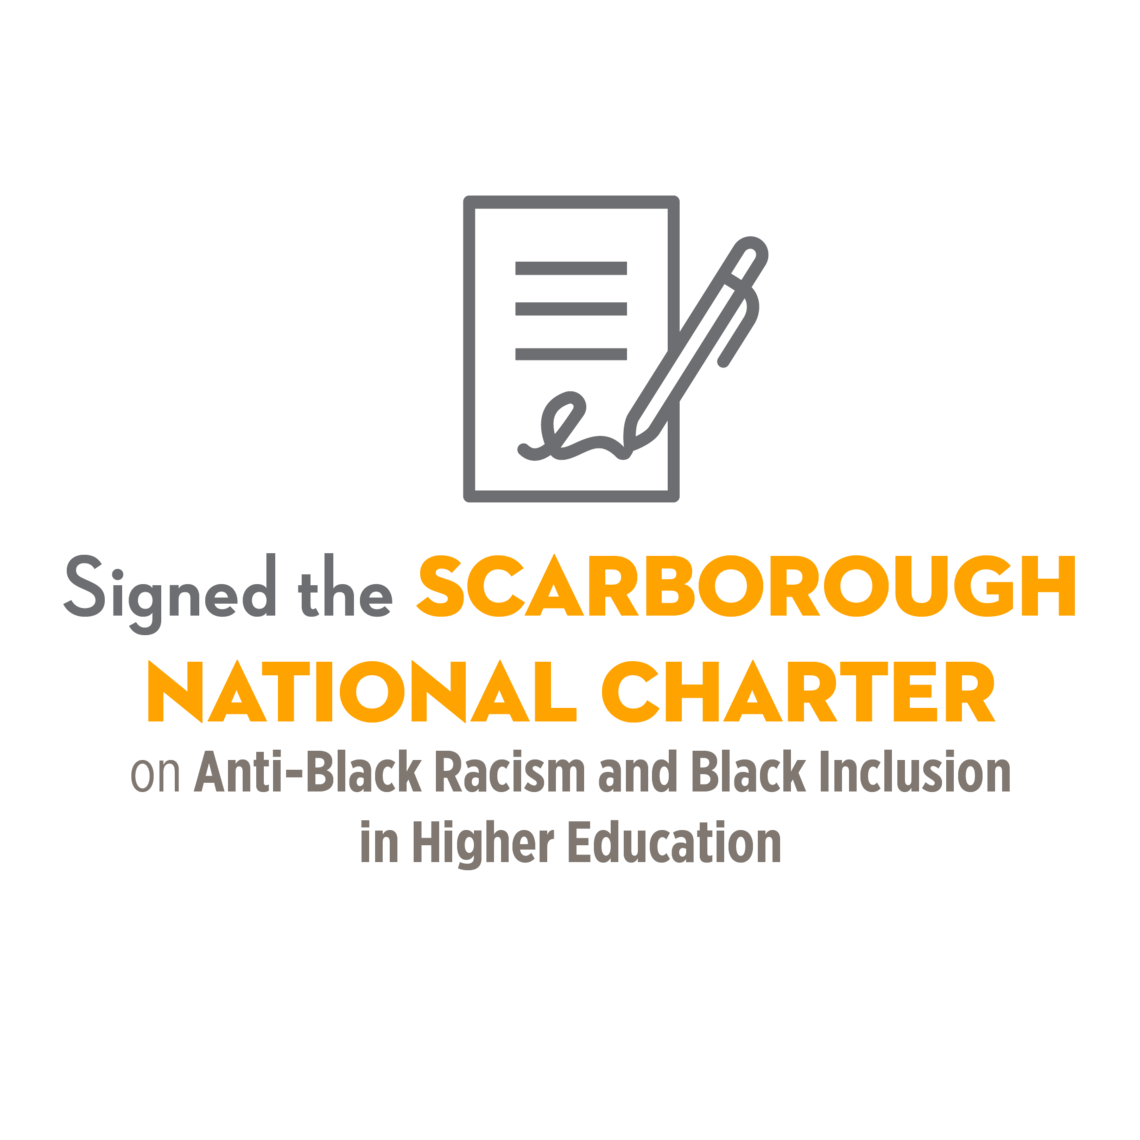 Signed the Scarborough Charter on Anti-Black racism and black inclusion for higher education